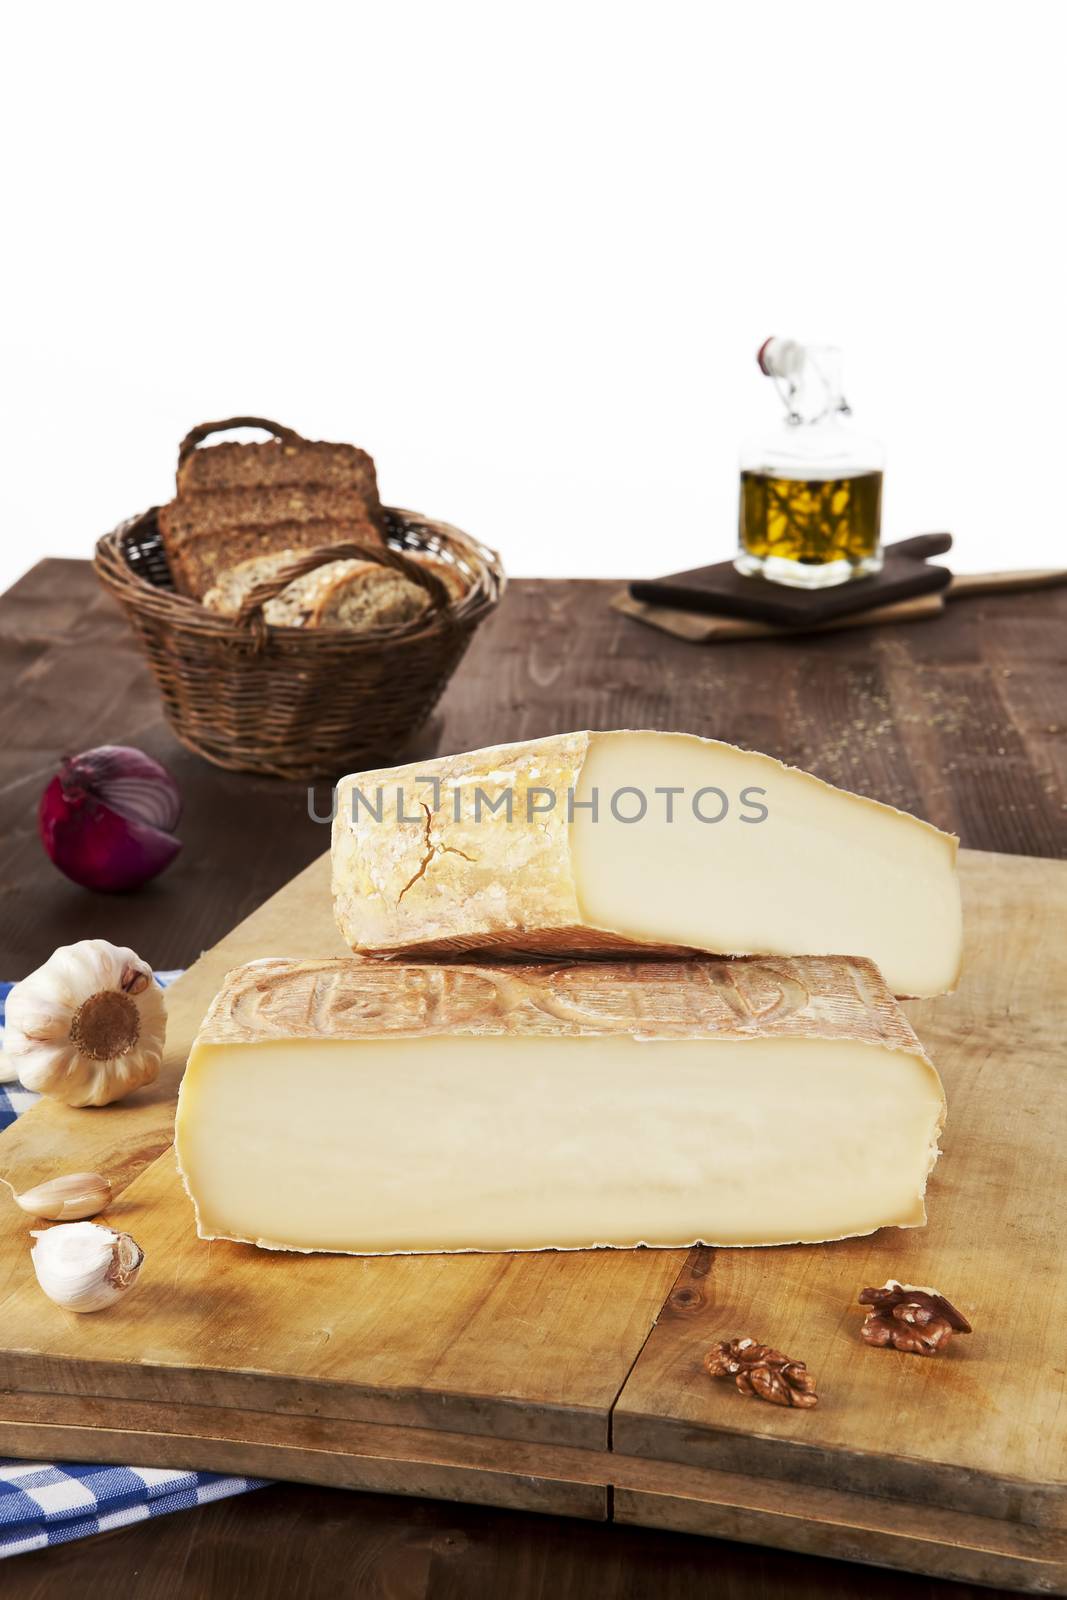 Big cheese pieces arranged on wooden board with garlic, onion, olive oil and bread in basket.